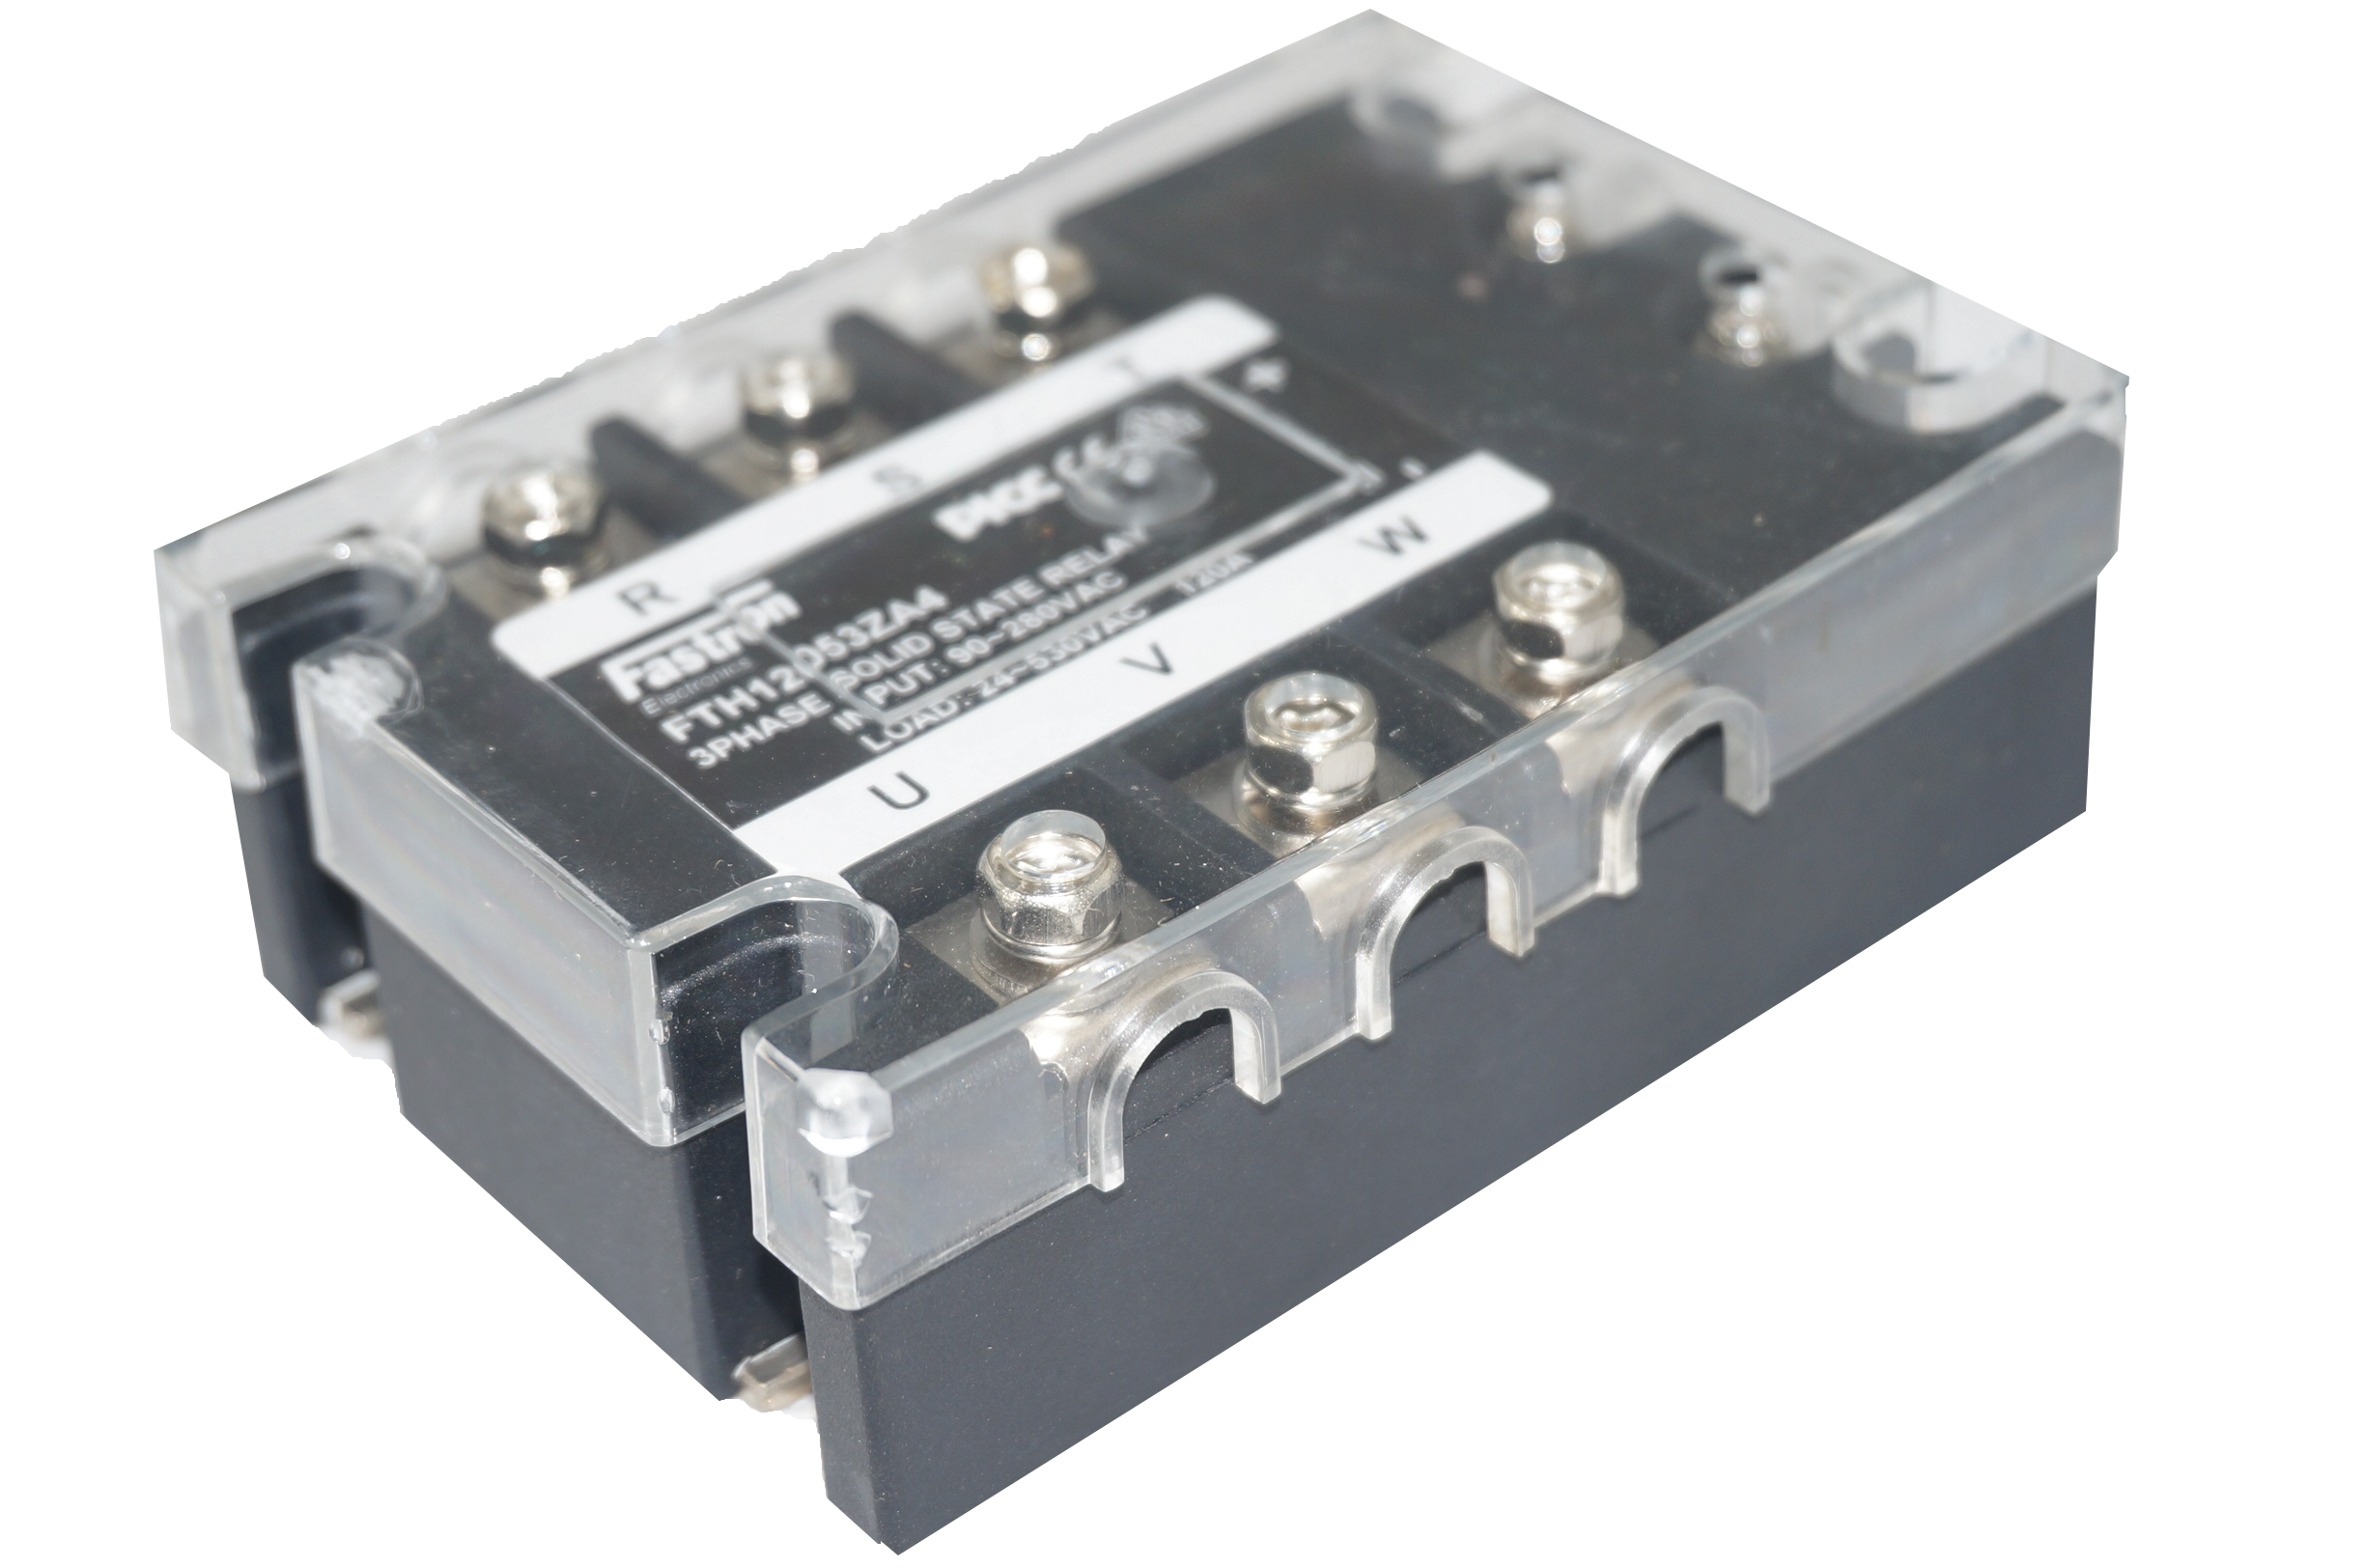 FTH12053ZA4, Solid State Relay, 3 Phase 90-280VAC Control, 120A, 70-530VAC Load, with IP20 Cover